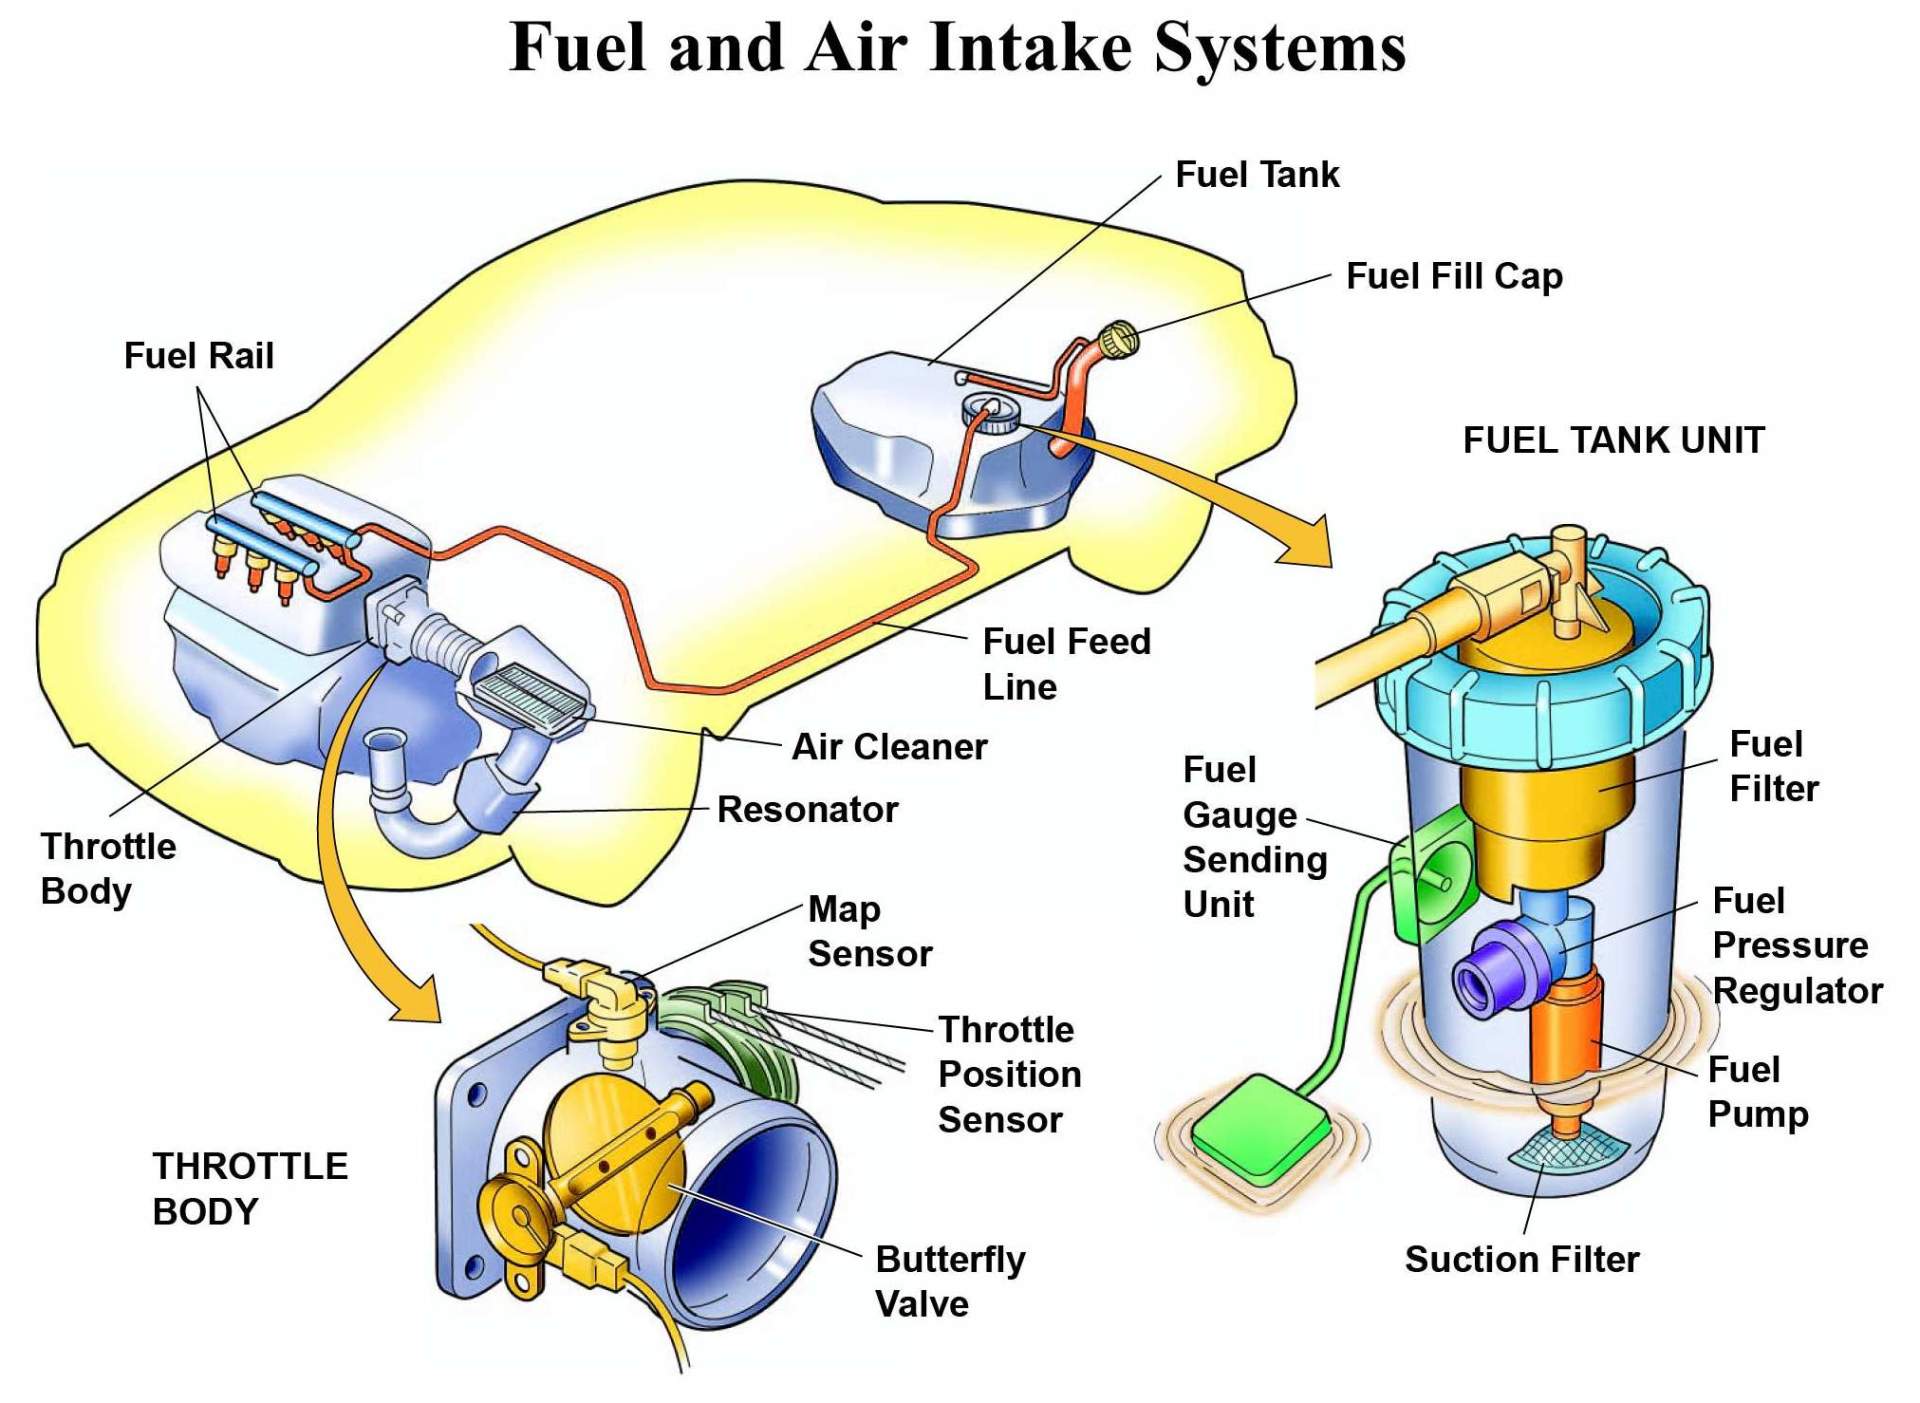 Fuel and Air Intake Systems